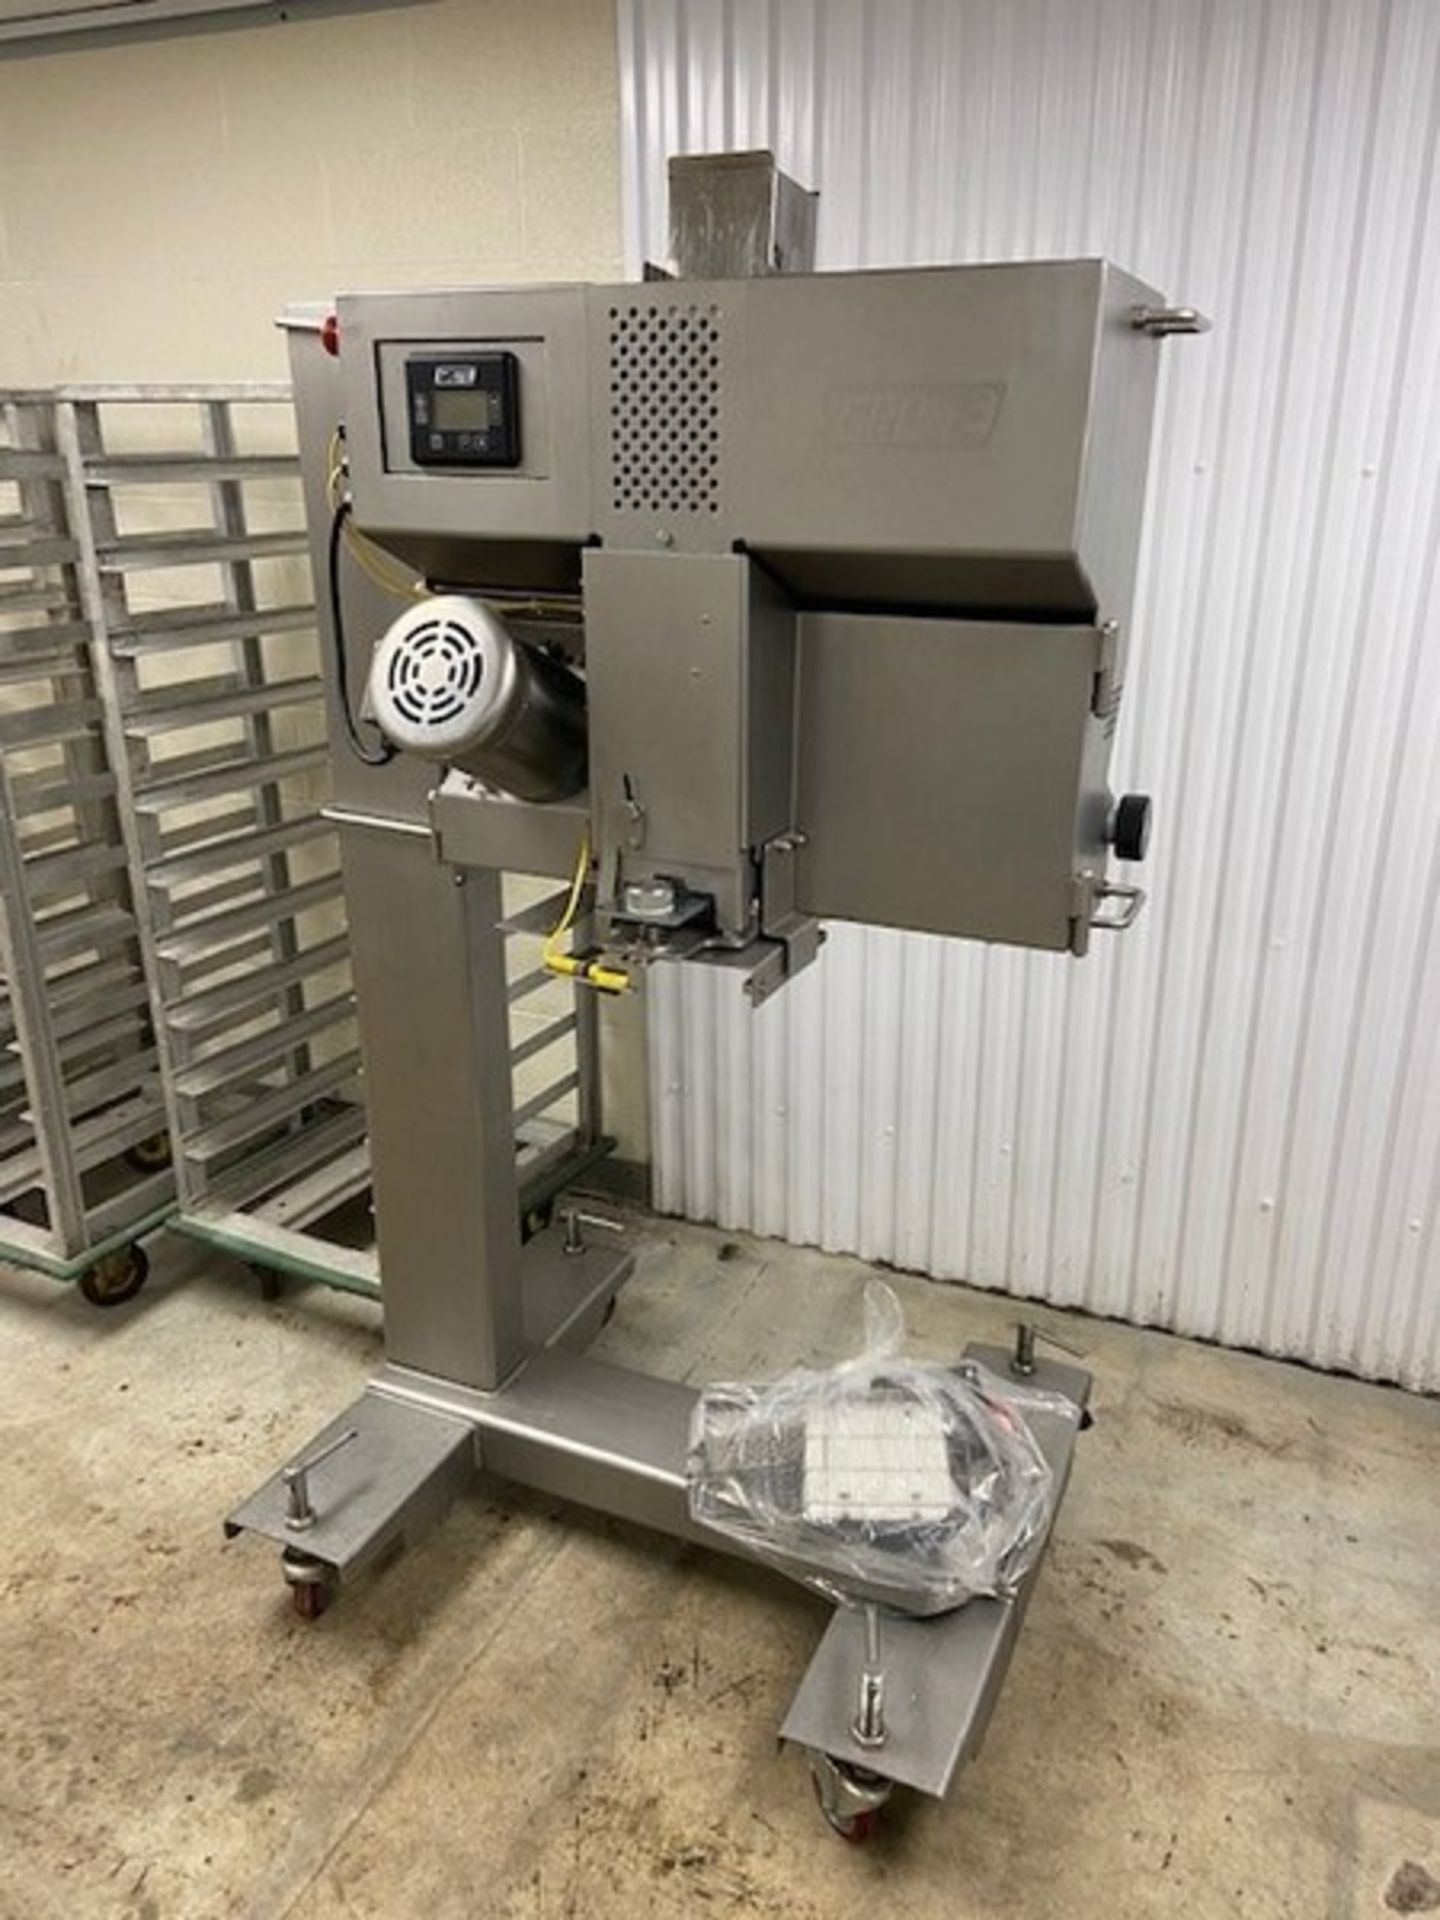 Grote S/S Slicer, M/N SNP-505, S/N 1080423, 220 Volts, 1 Phase, Mounted on Portable Frame (Located